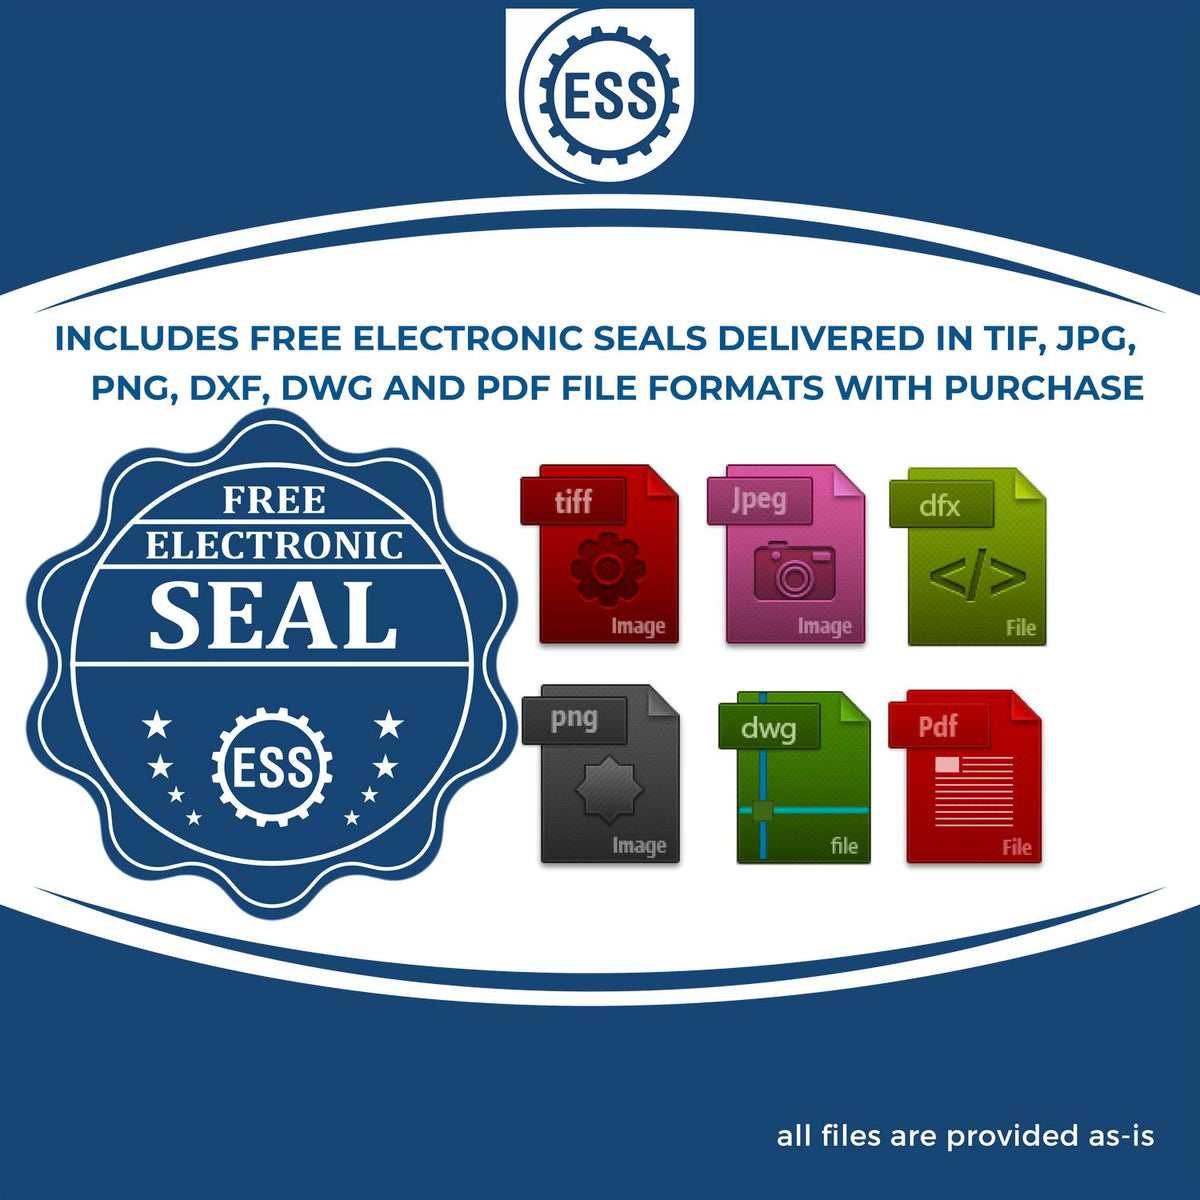 An infographic for the free electronic seal for the Heavy Duty Cast Iron Mississippi Geologist Seal Embosser illustrating the different file type icons such as DXF, DWG, TIF, JPG and PNG.